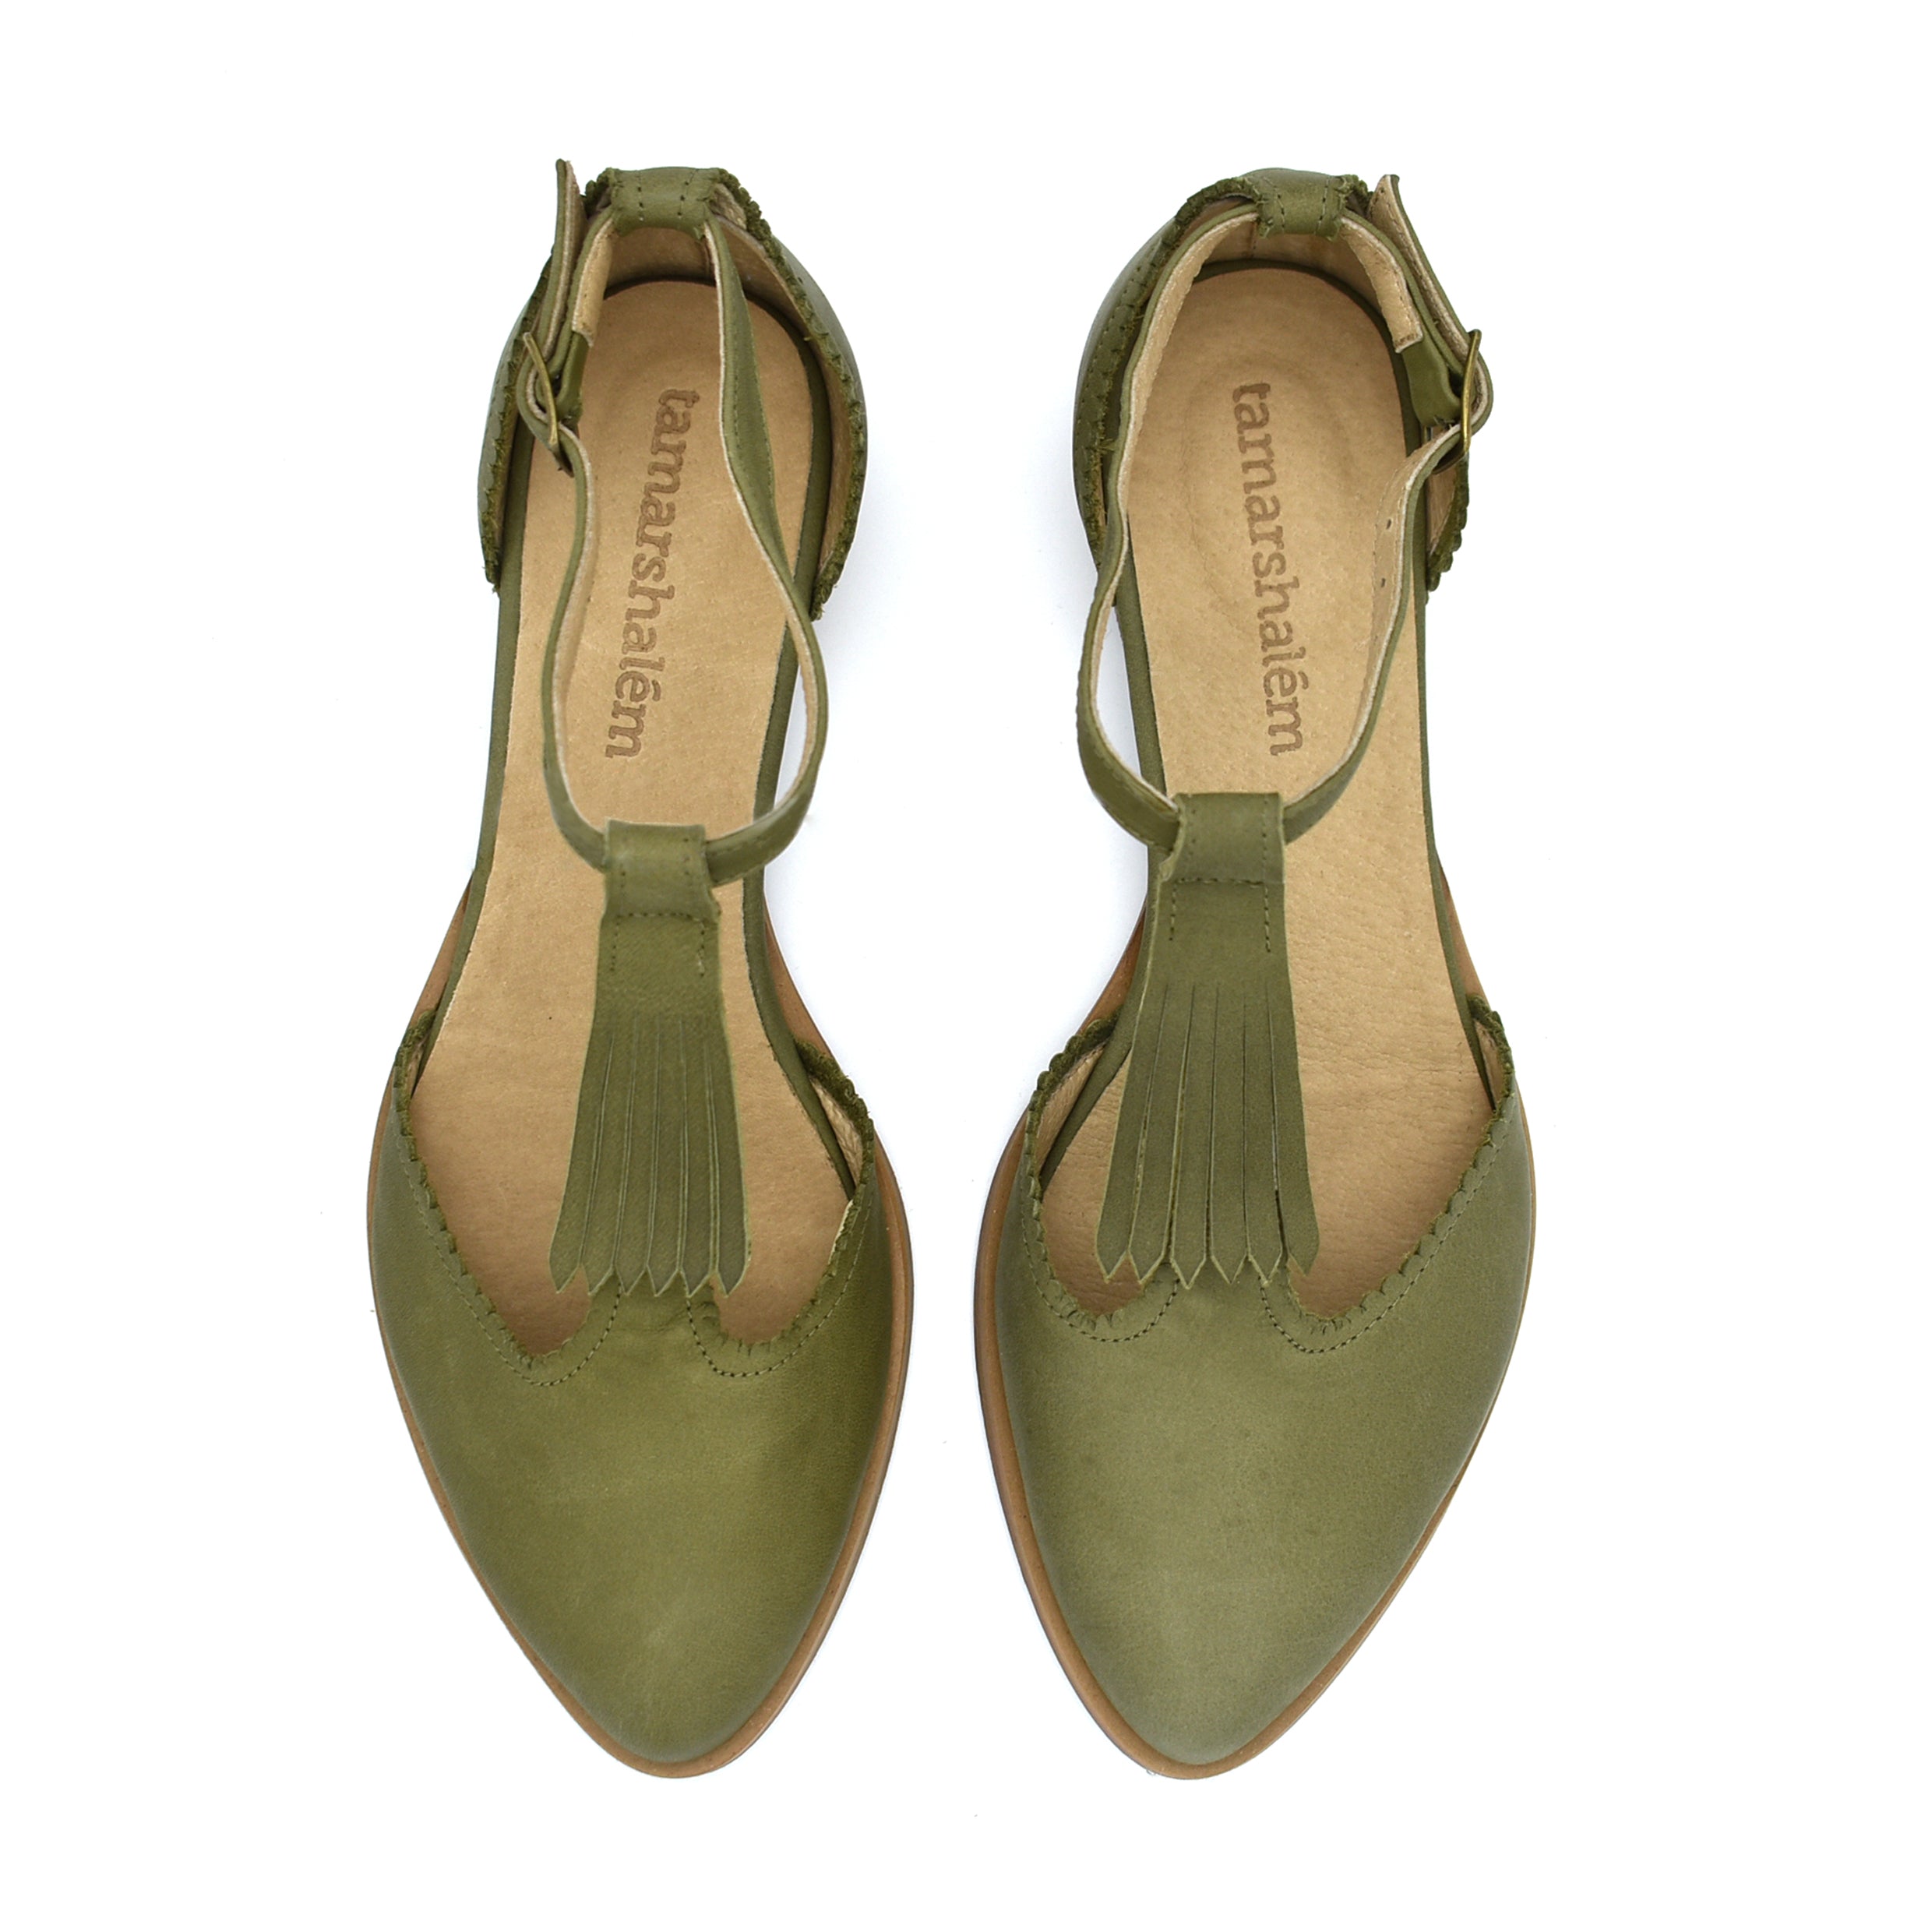 olive green leather shoes